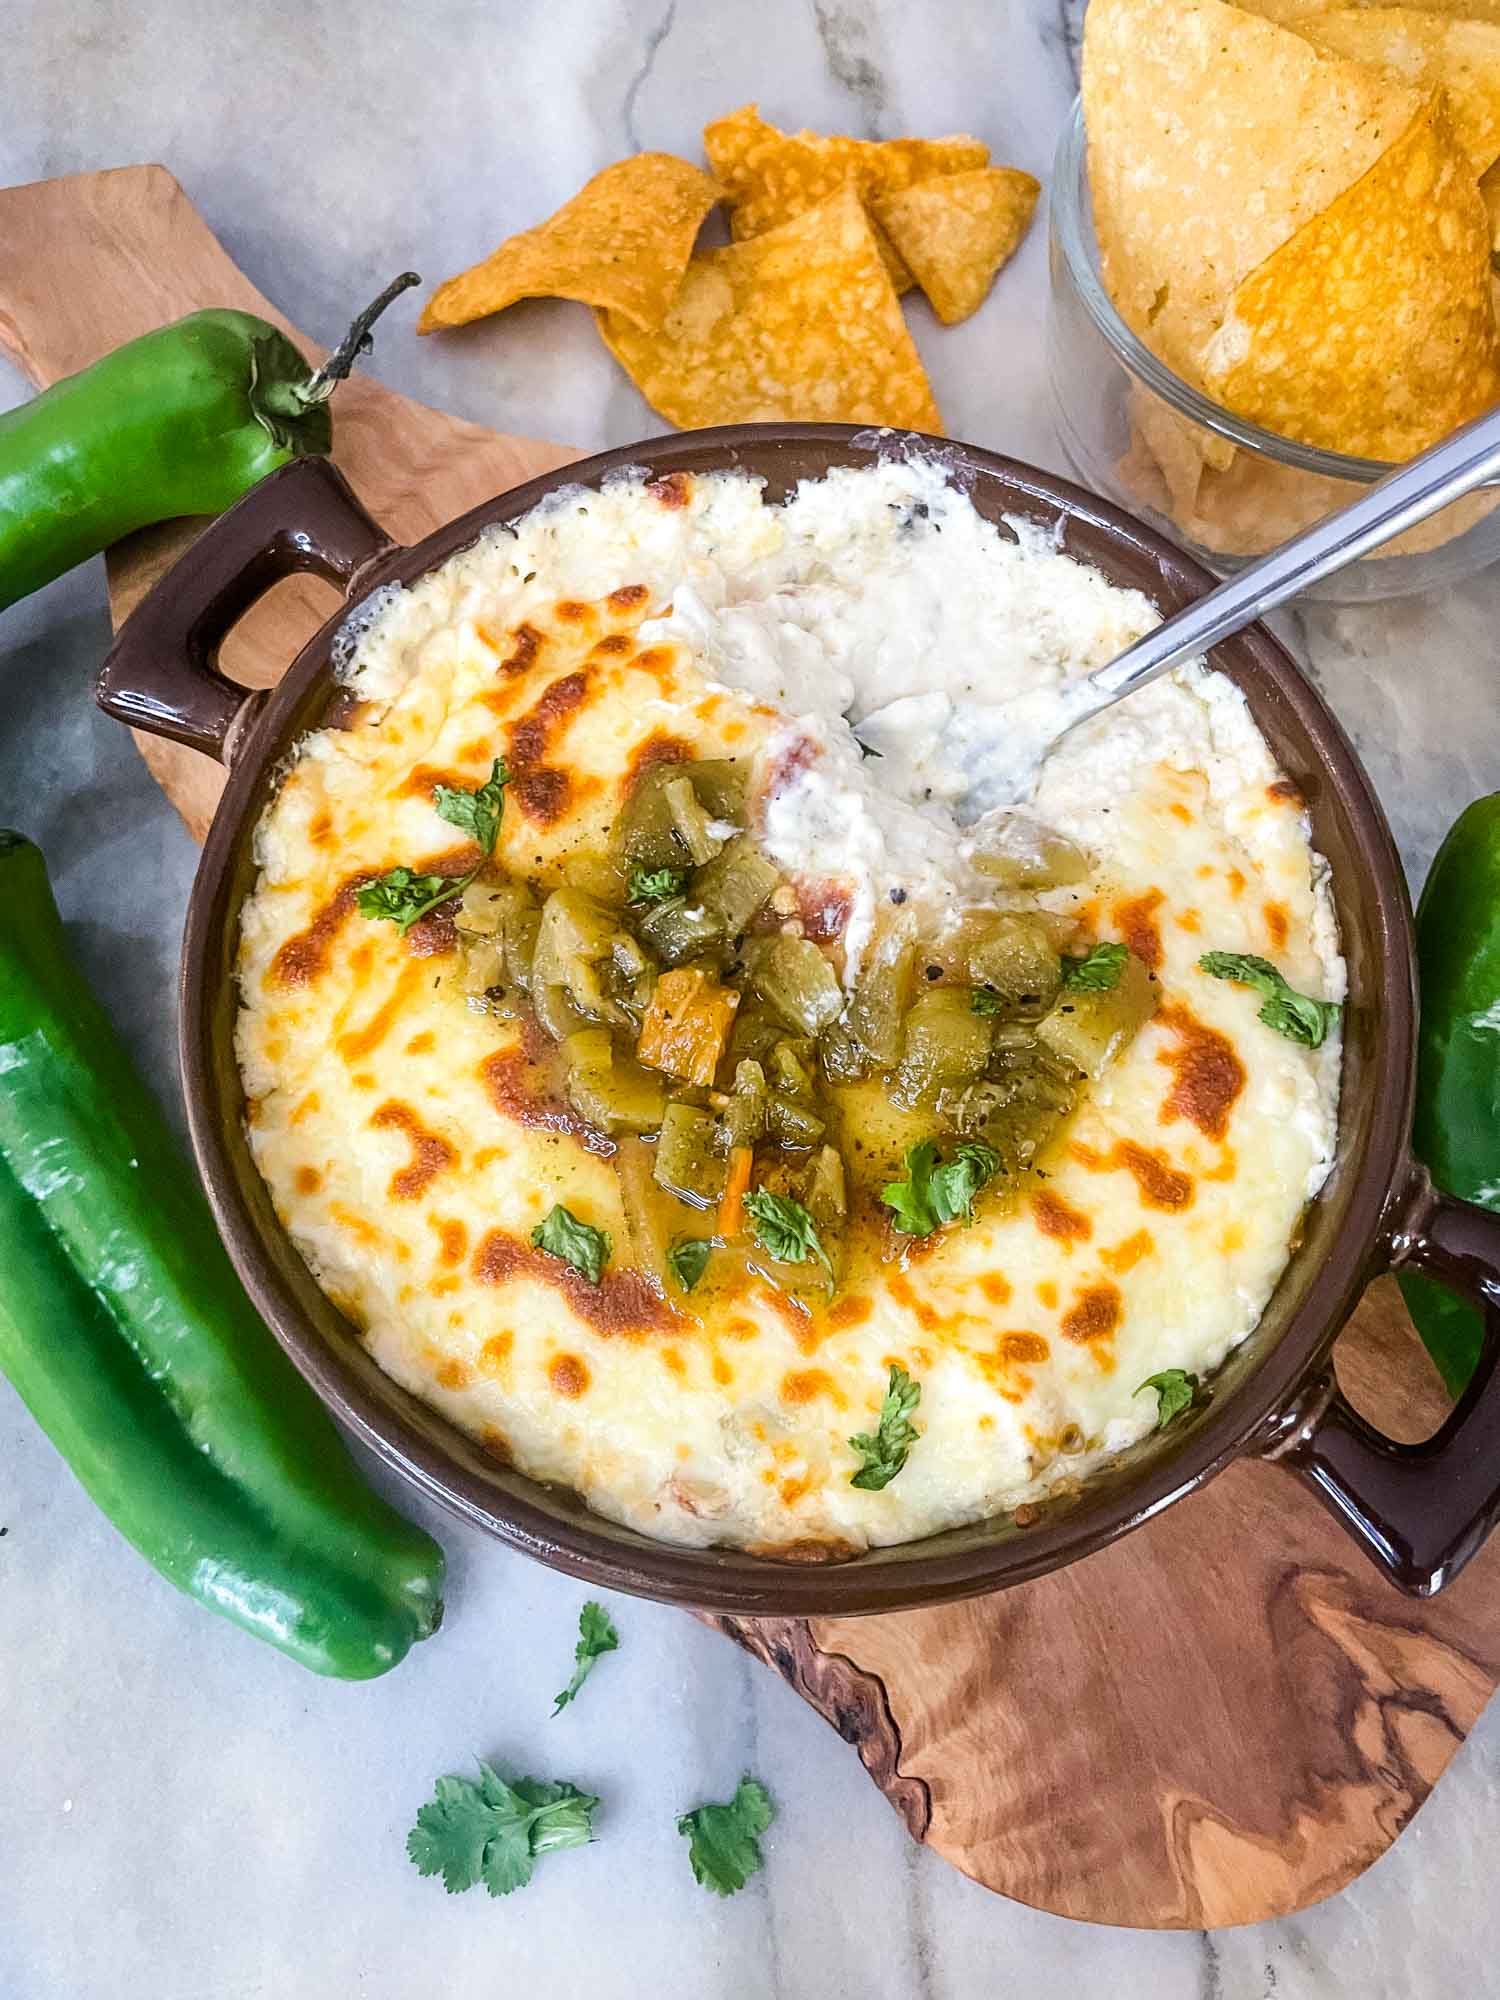 Hatch green chili dip in a small bowl.